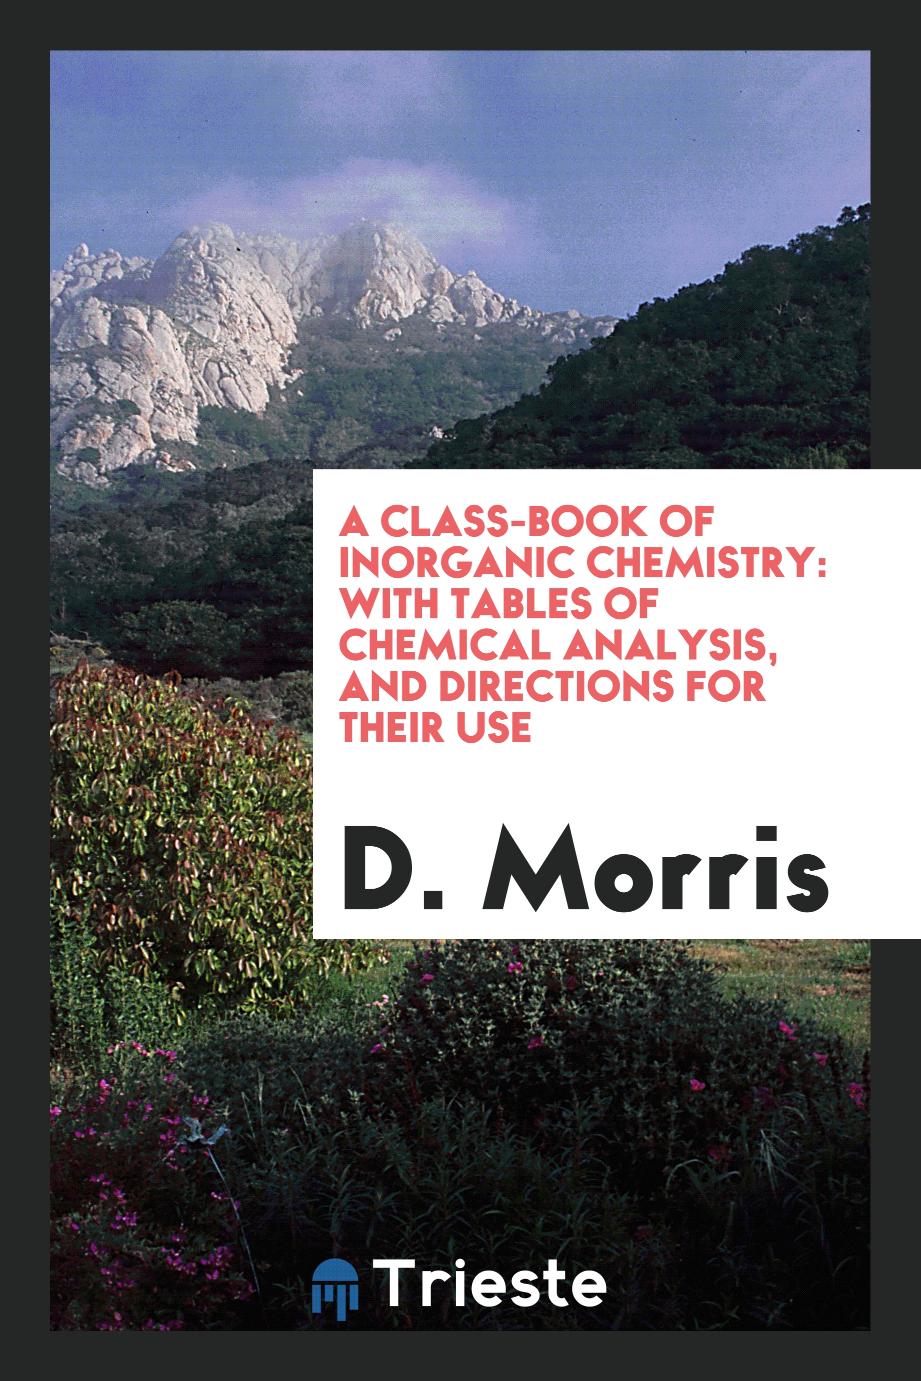 A Class-Book of Inorganic Chemistry: With Tables of Chemical Analysis, and Directions for Their Use